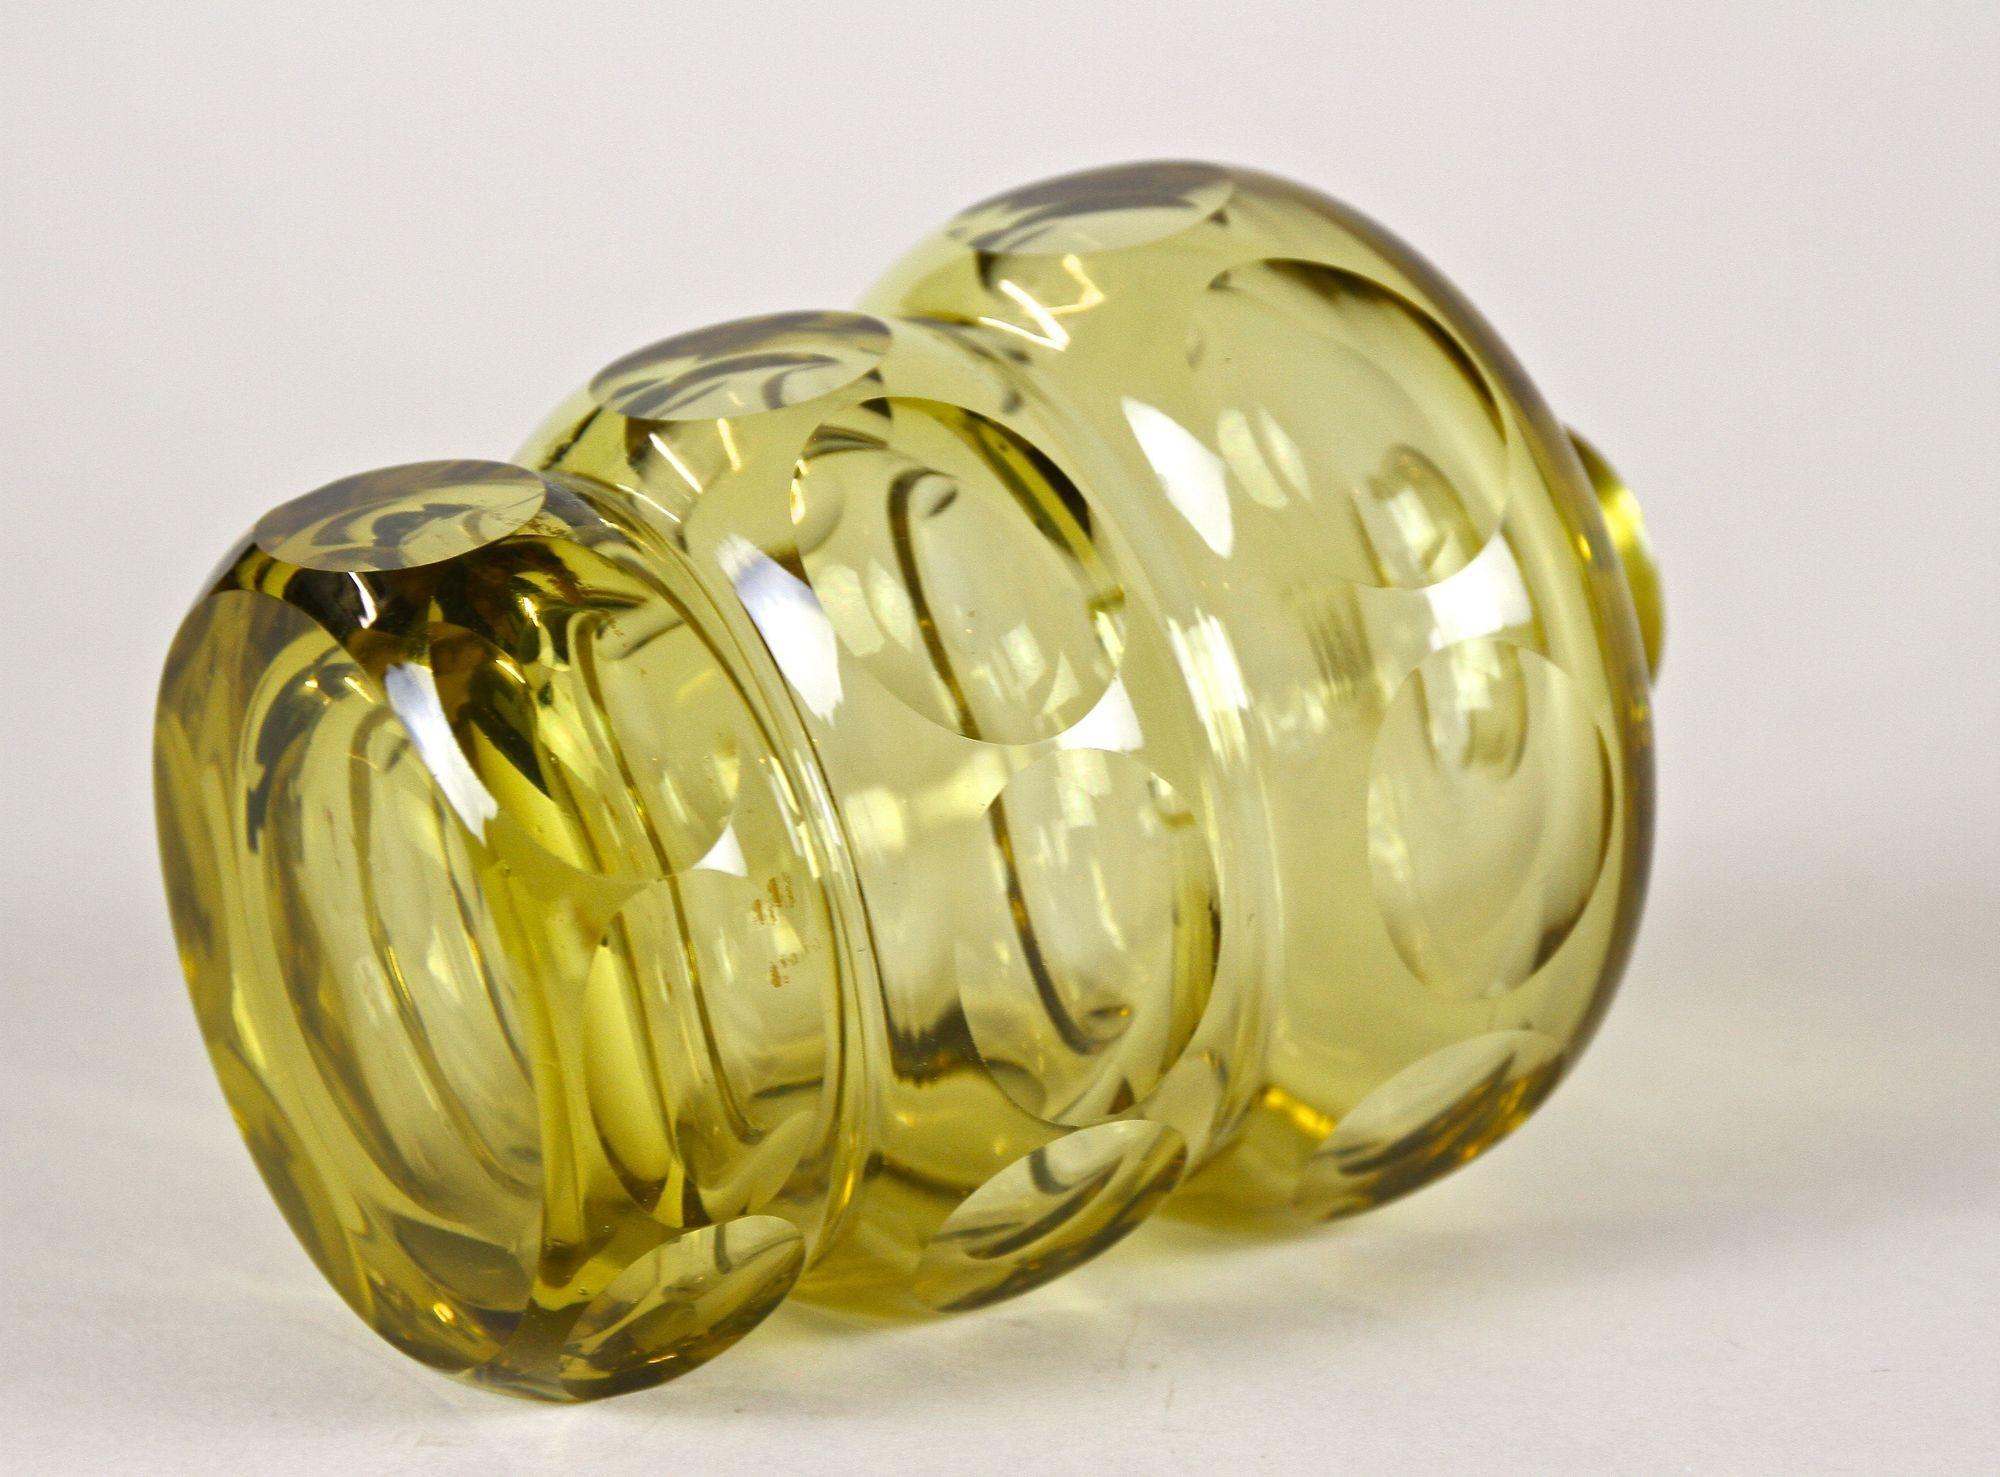 Amber-Colored Art Deco Glass Bottle with Lid, Bohemia circa 1930 11